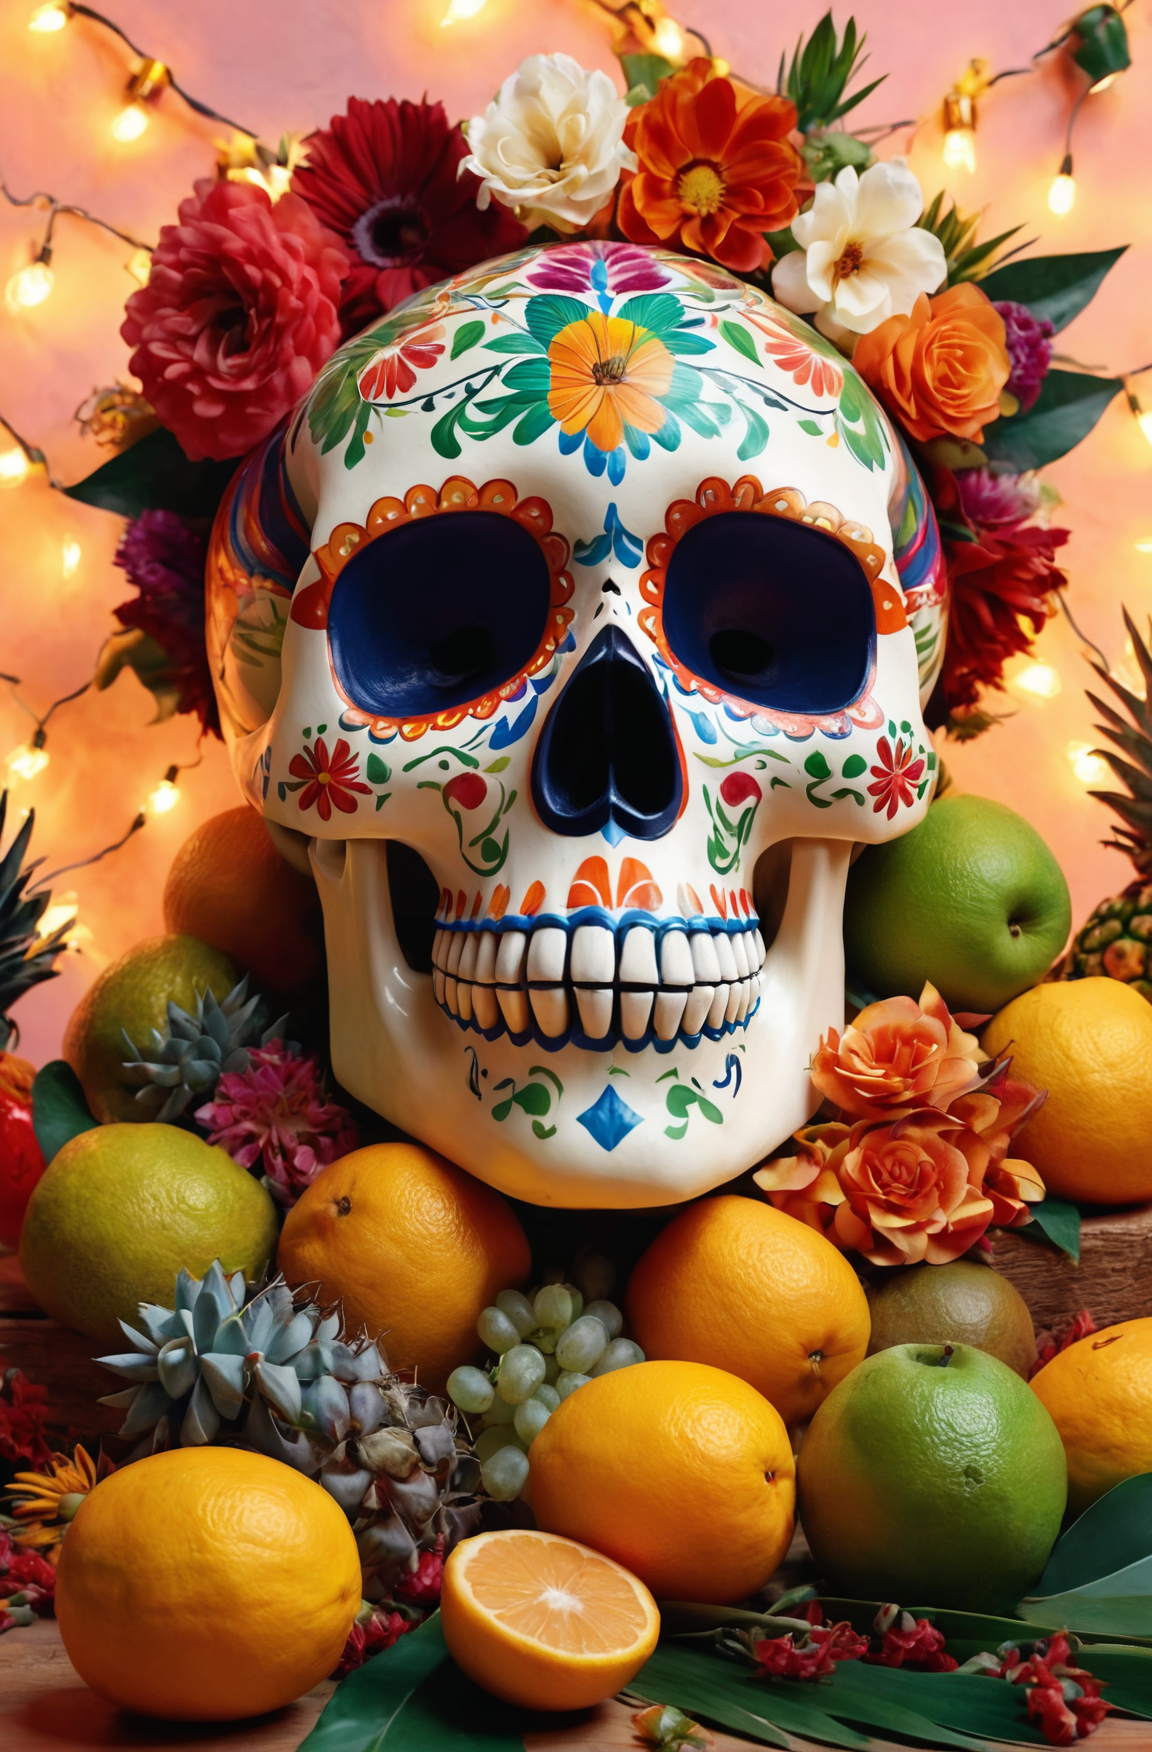 stunning still-life photo render of a Mexican Skull Calavera, surrounded by poetic ornamental elements such as fruits, flo...